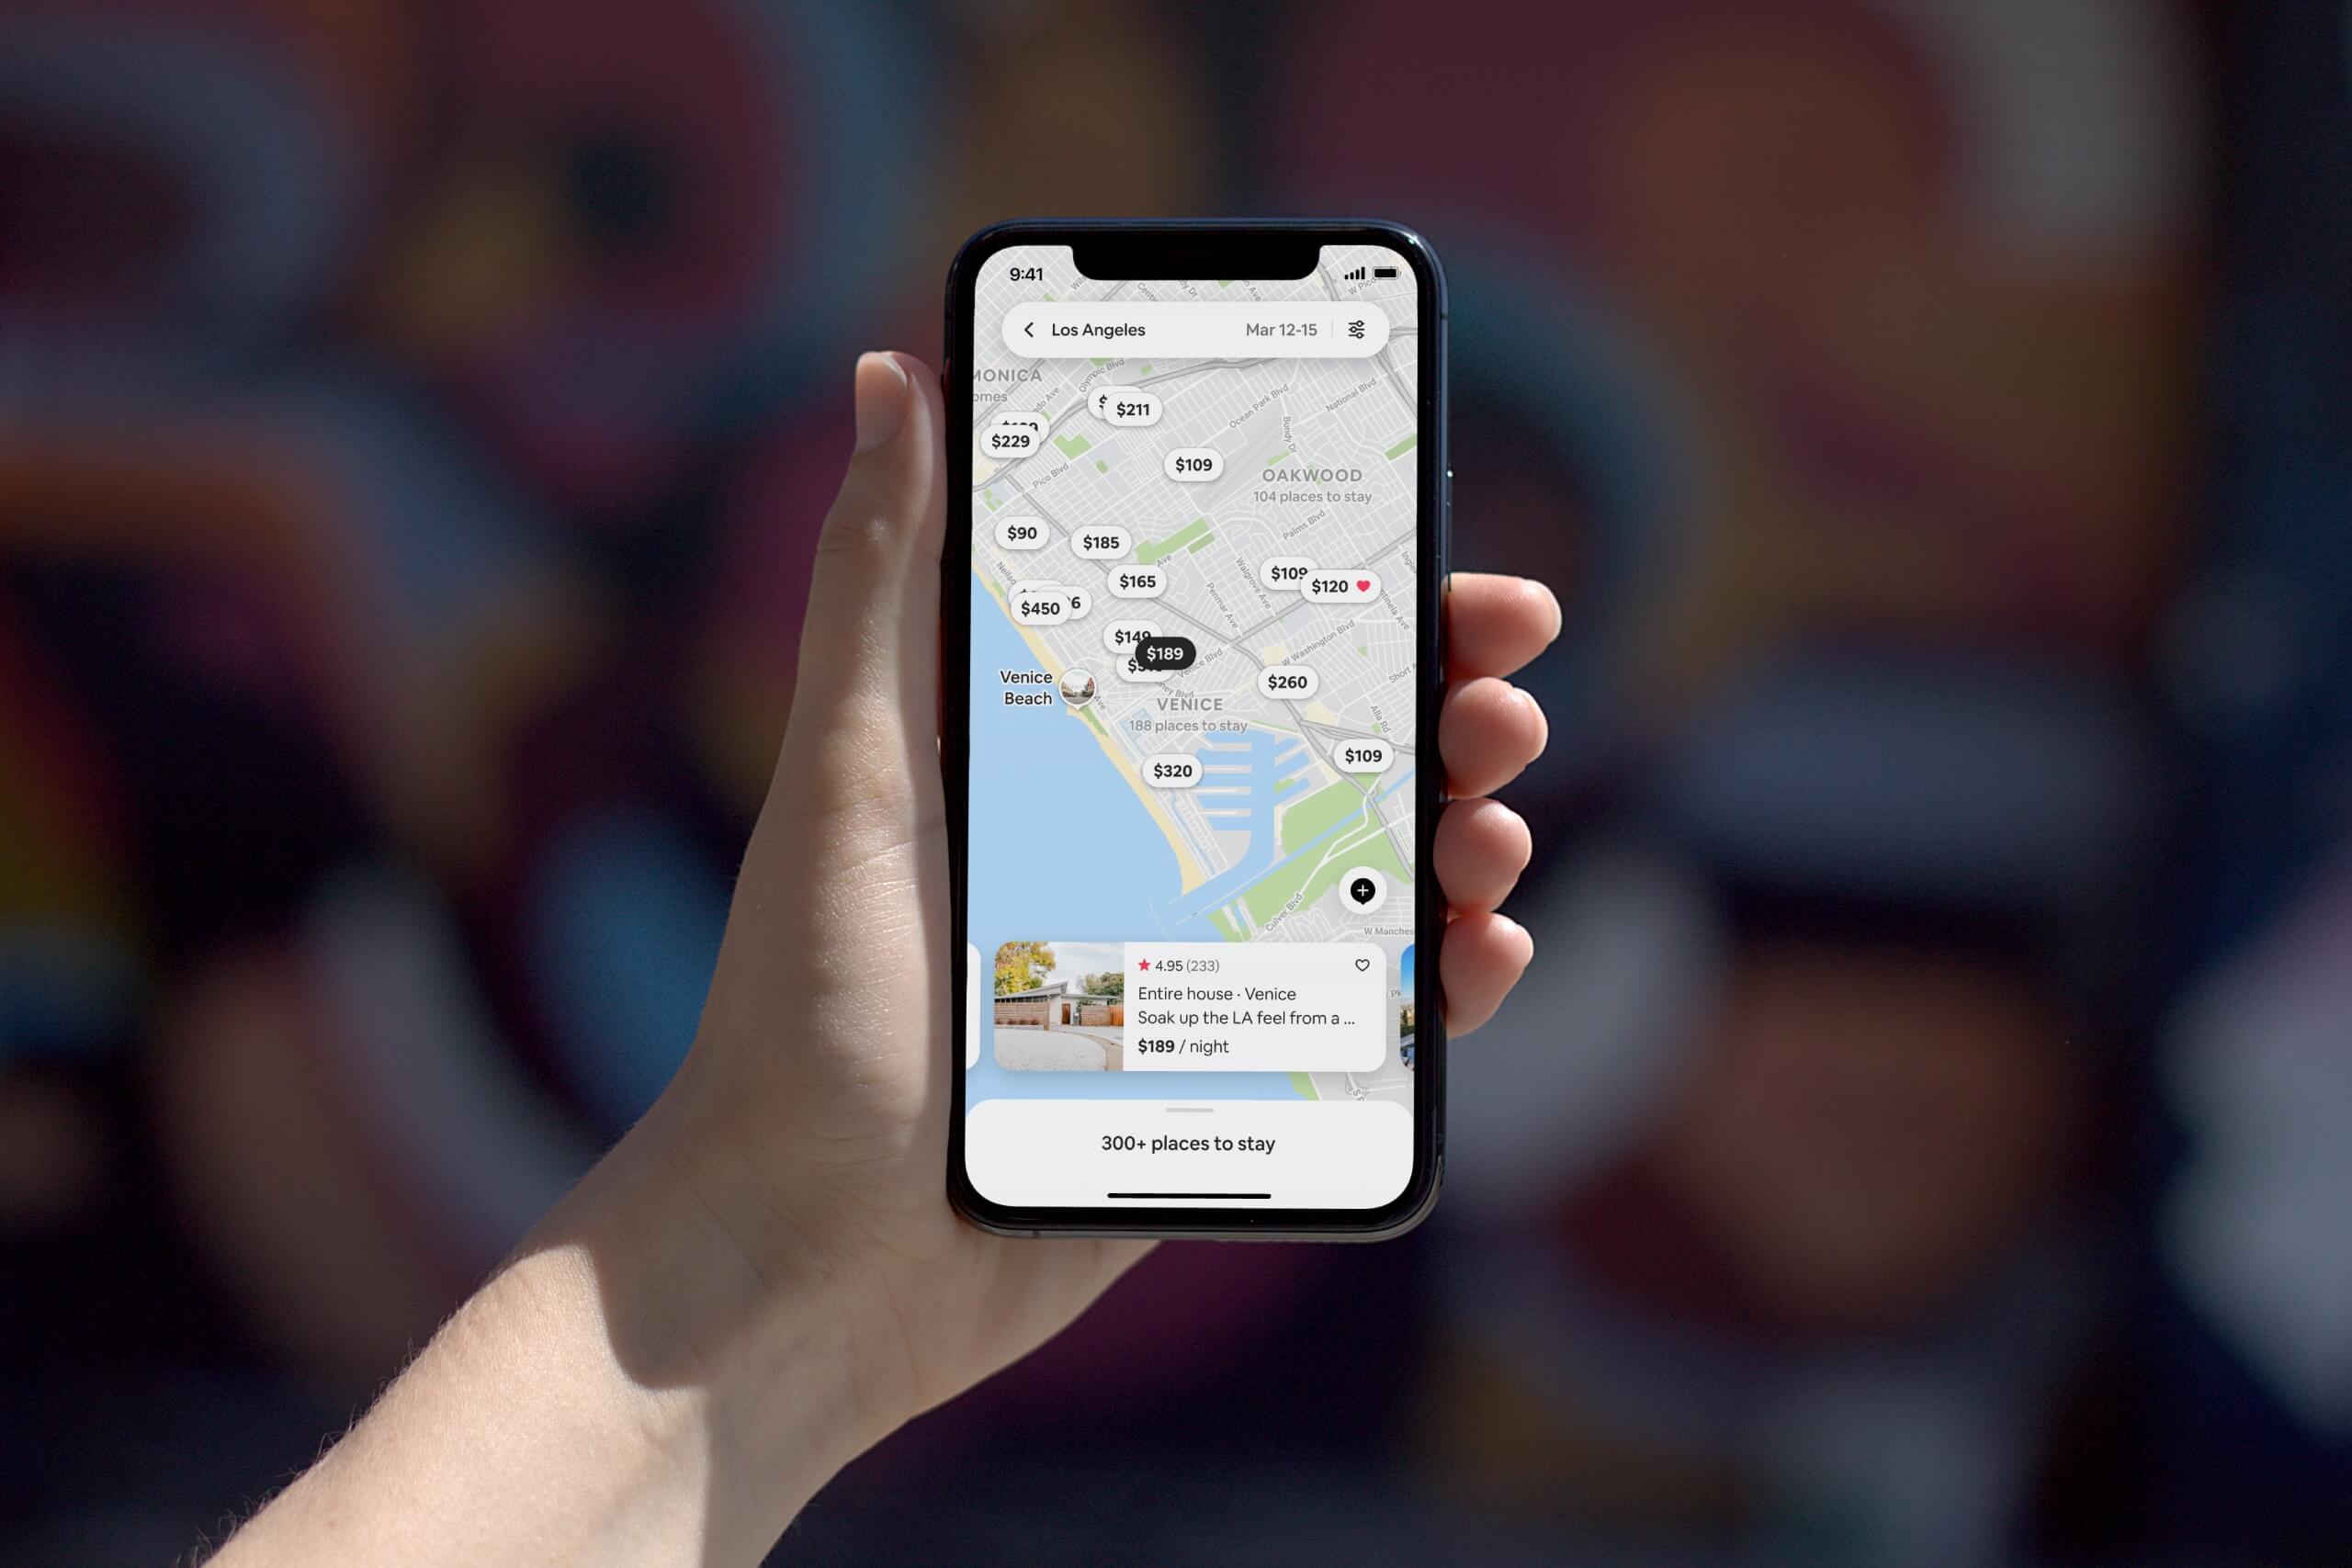 iPhone 11 being held showing an Airbnb search results map view of Los Angeles